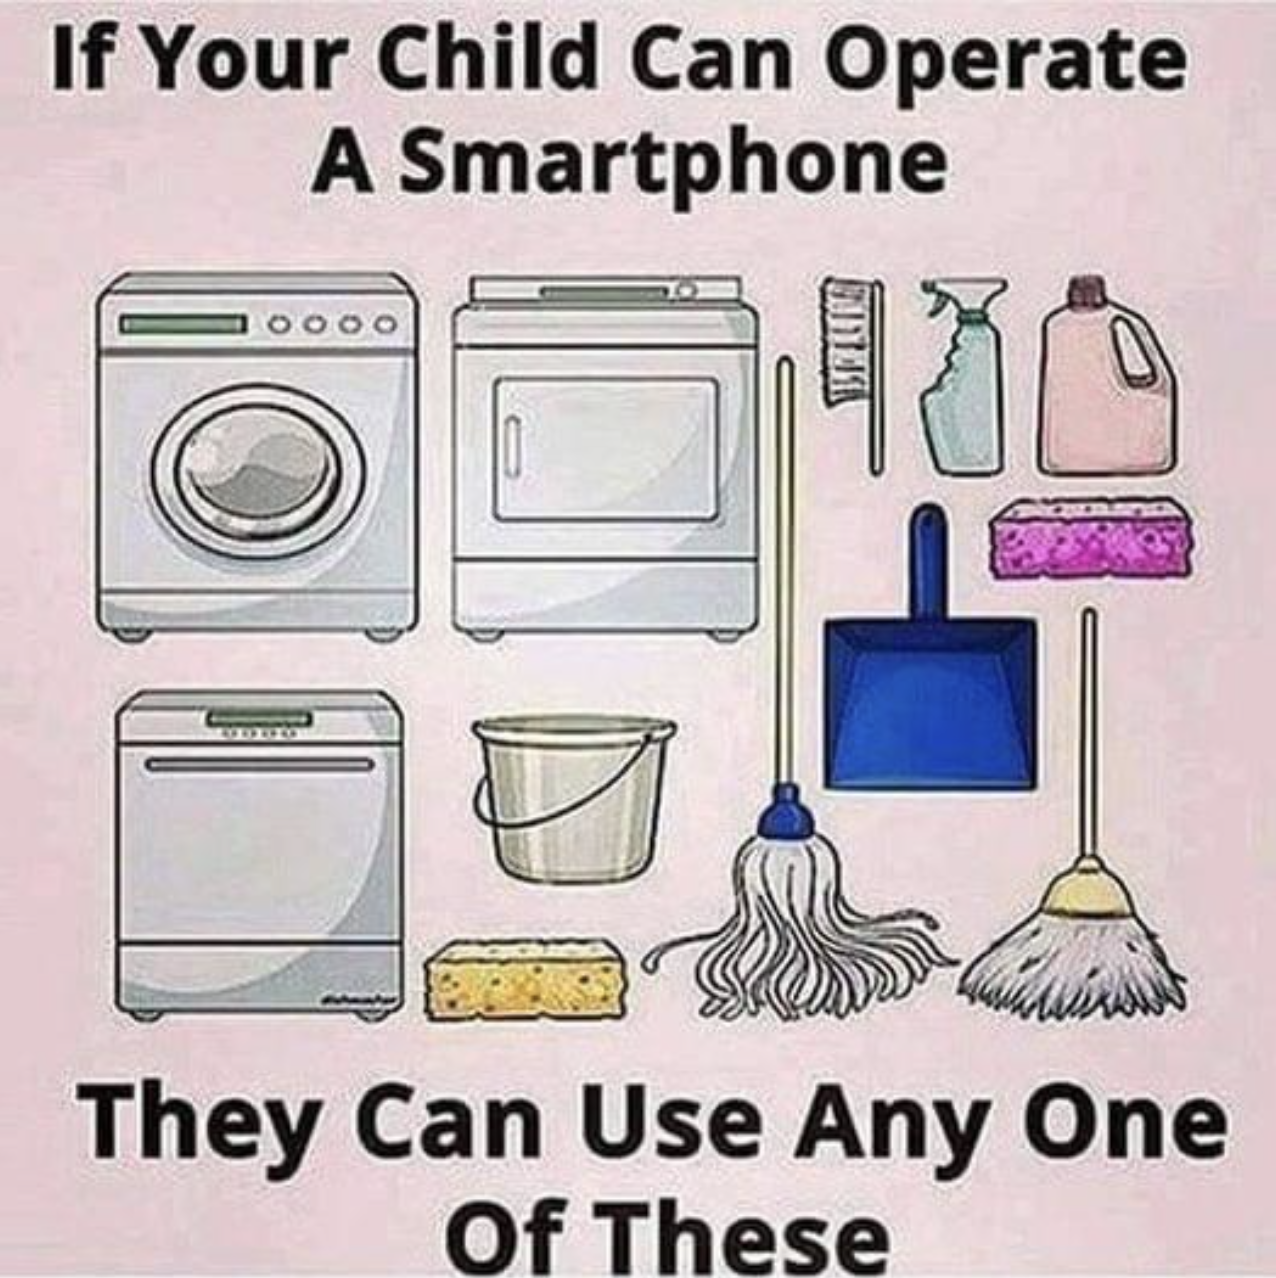 if your child can operate a smart phone they can - If Your Child Can Operate A SmartphoneThey Can Use Any One Of These